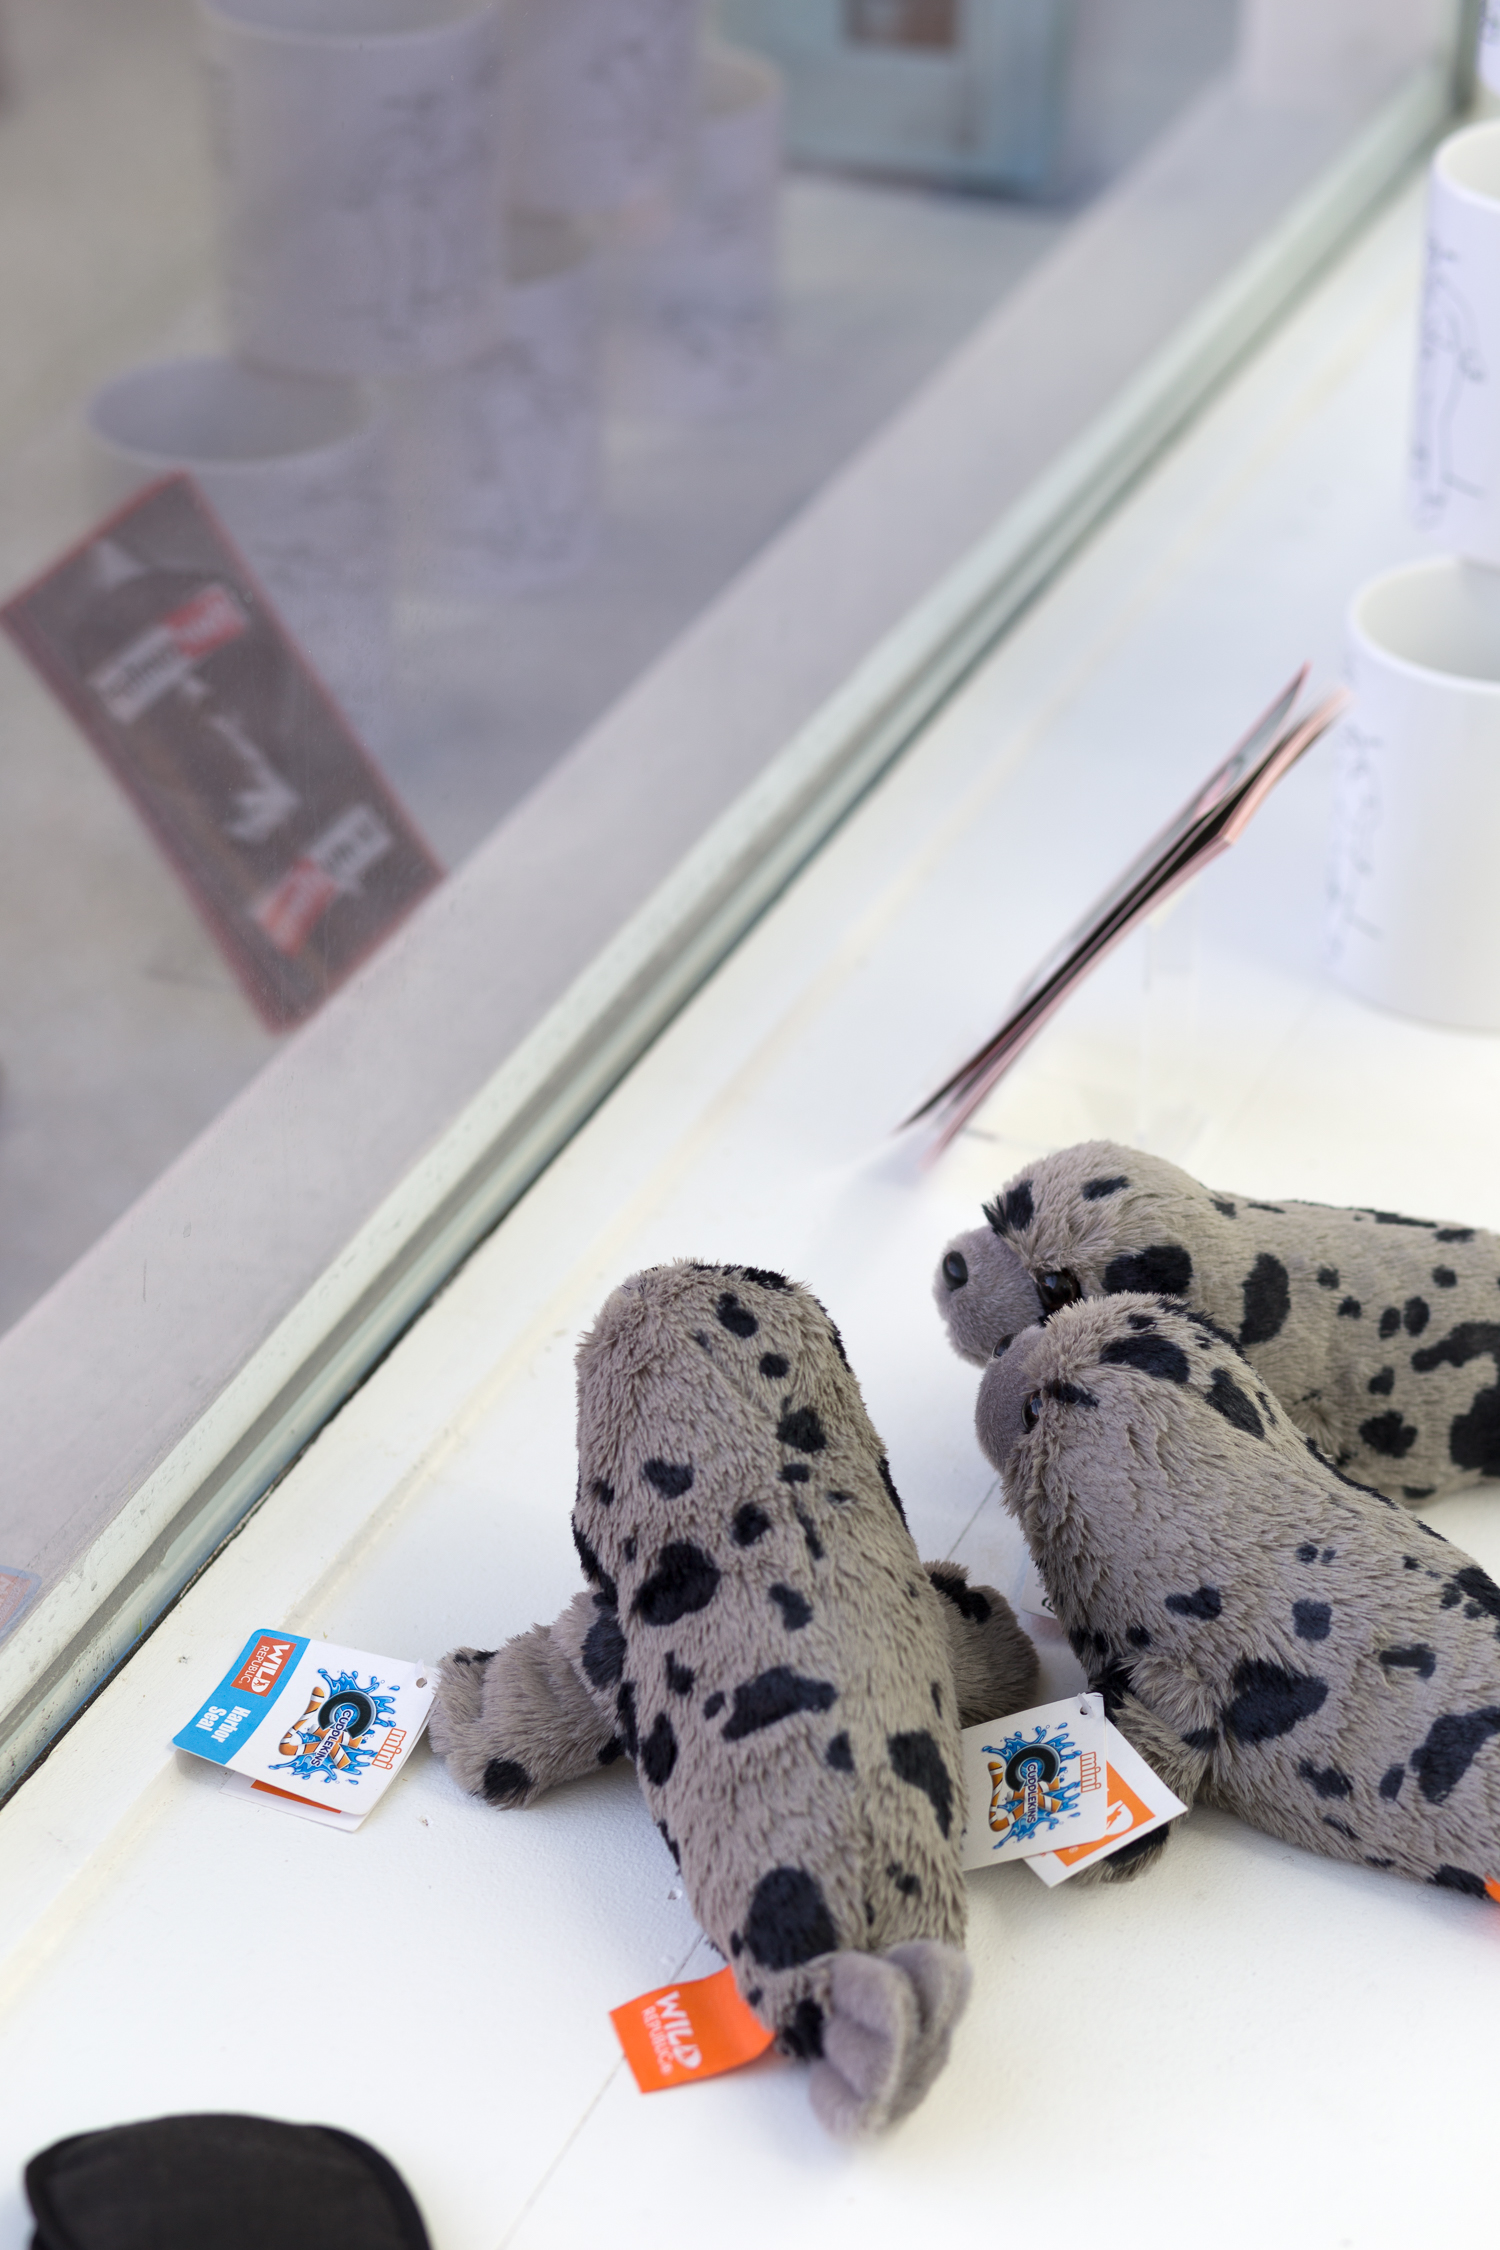 Three stuffed spotted seals sit in the window